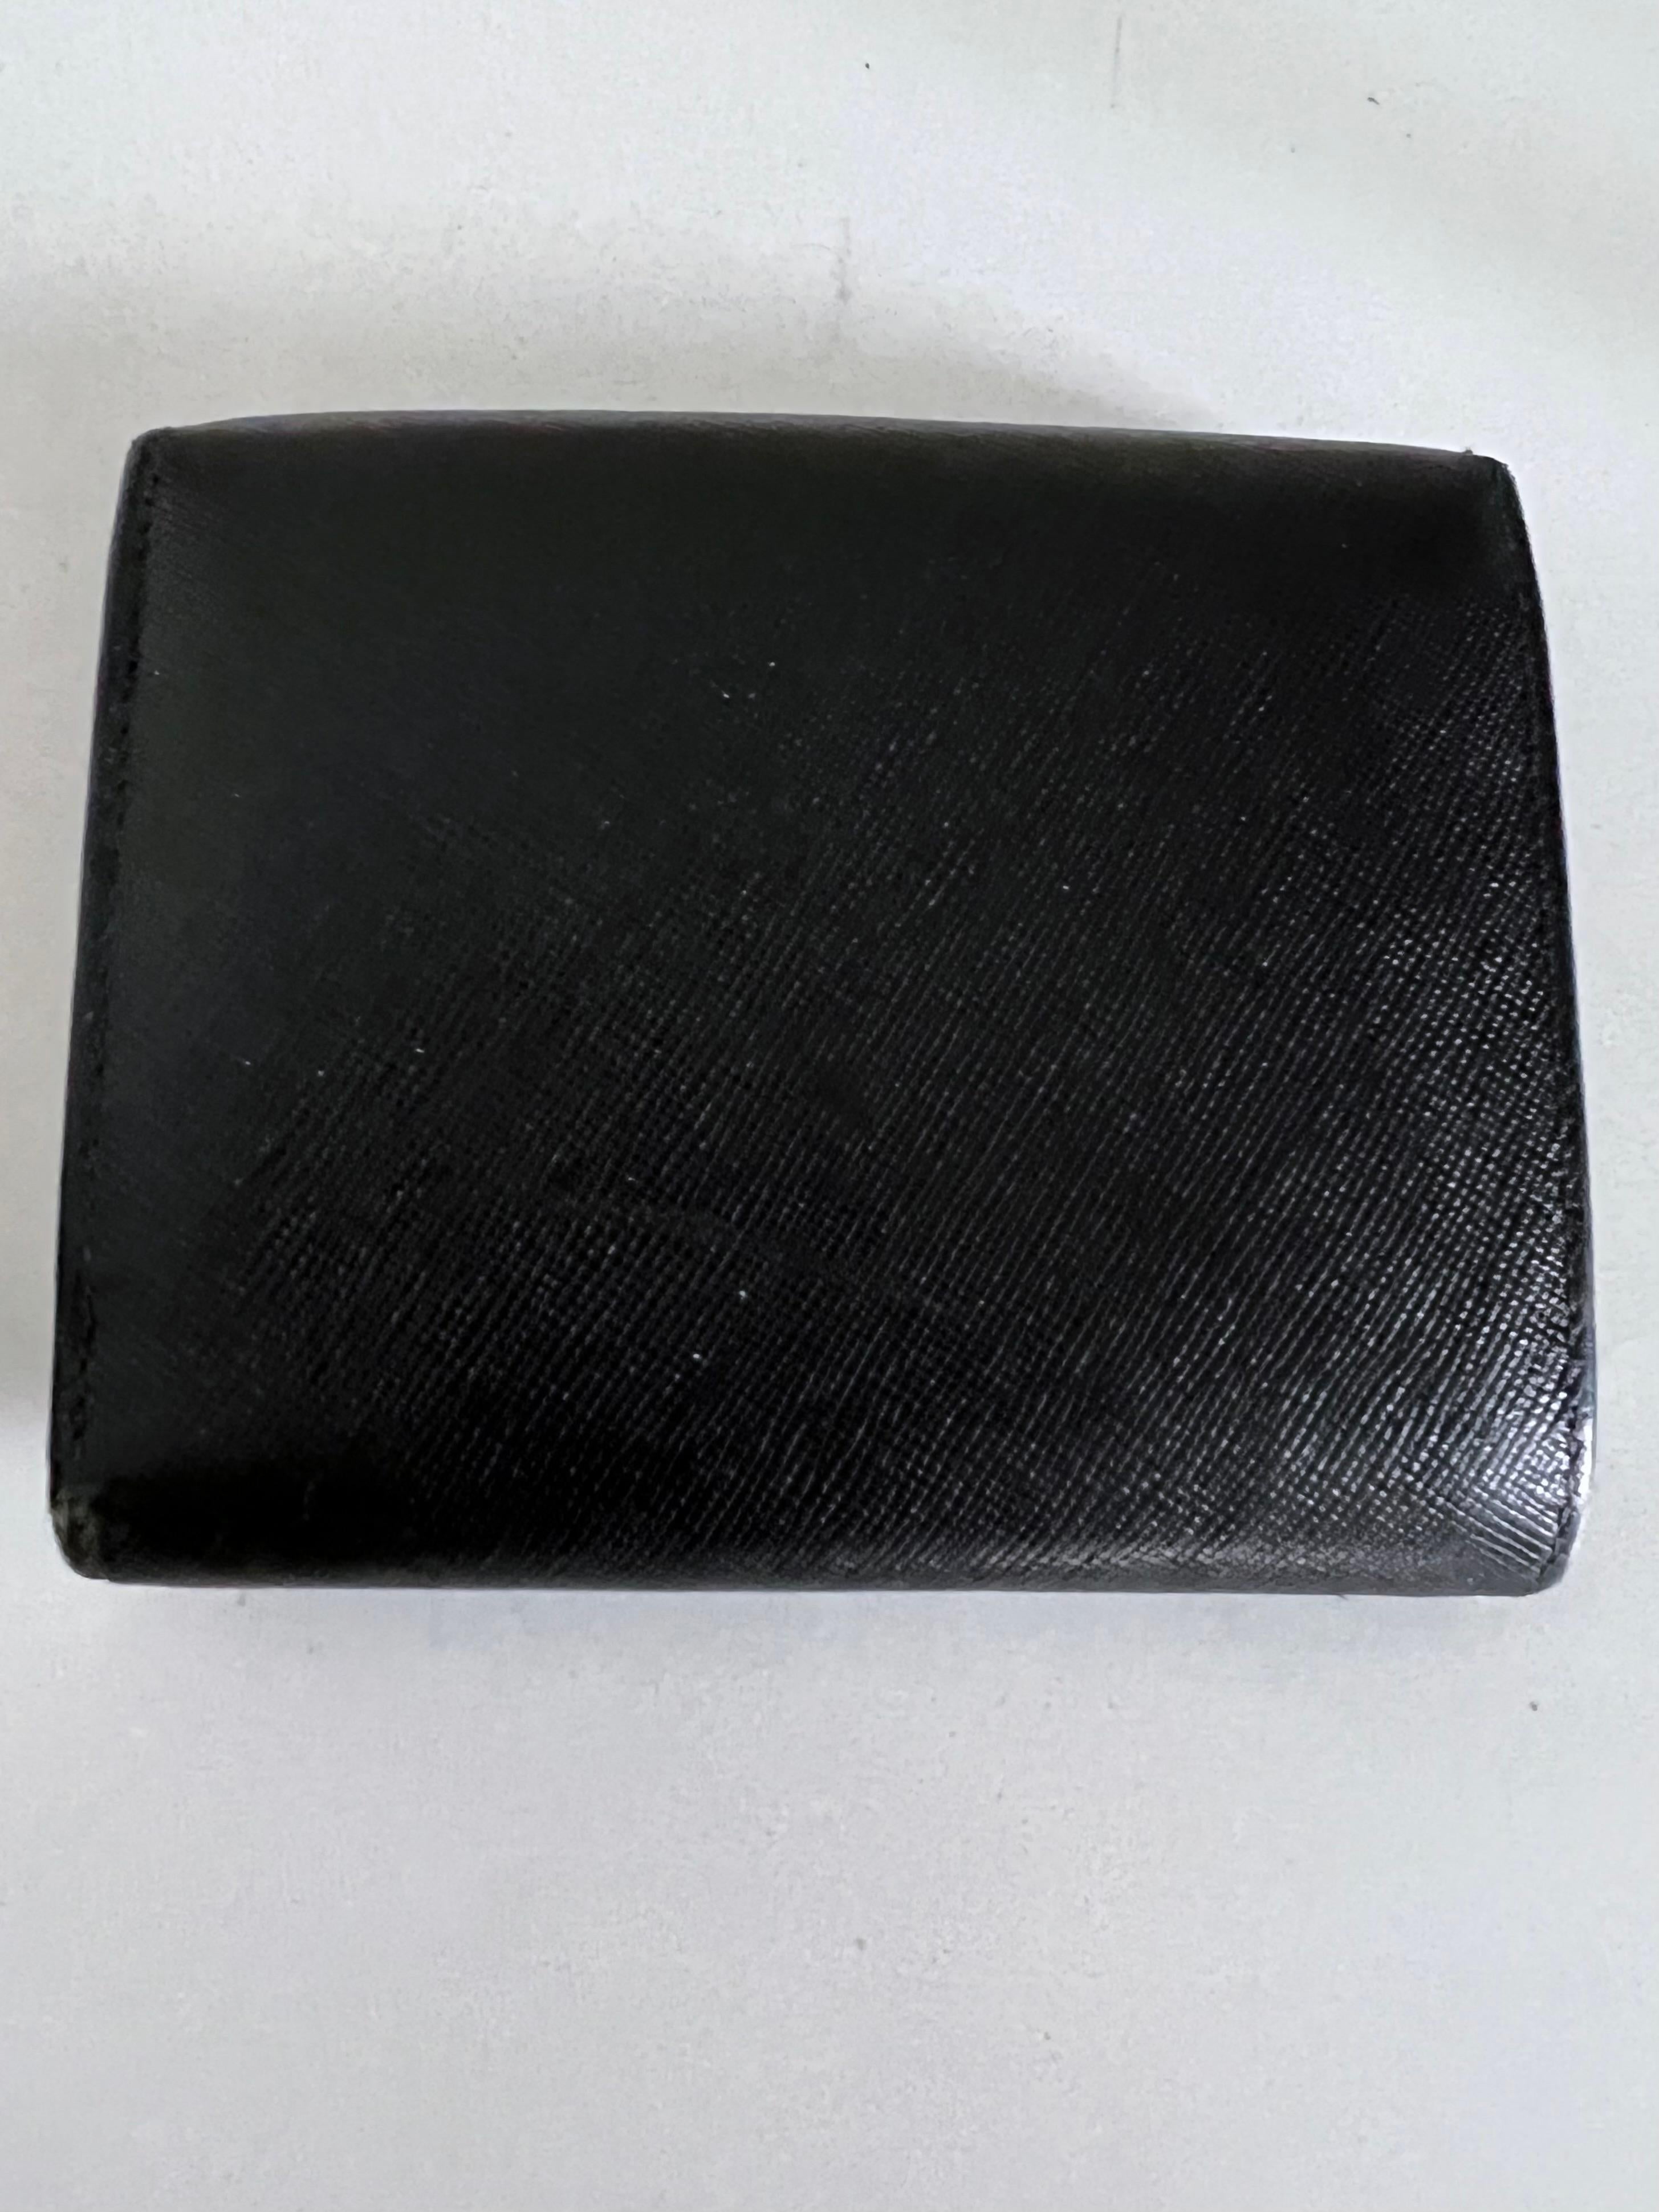 Prada Unisex Tri Fold Wallet with many Compartments In Good Condition For Sale In Los Angeles, CA